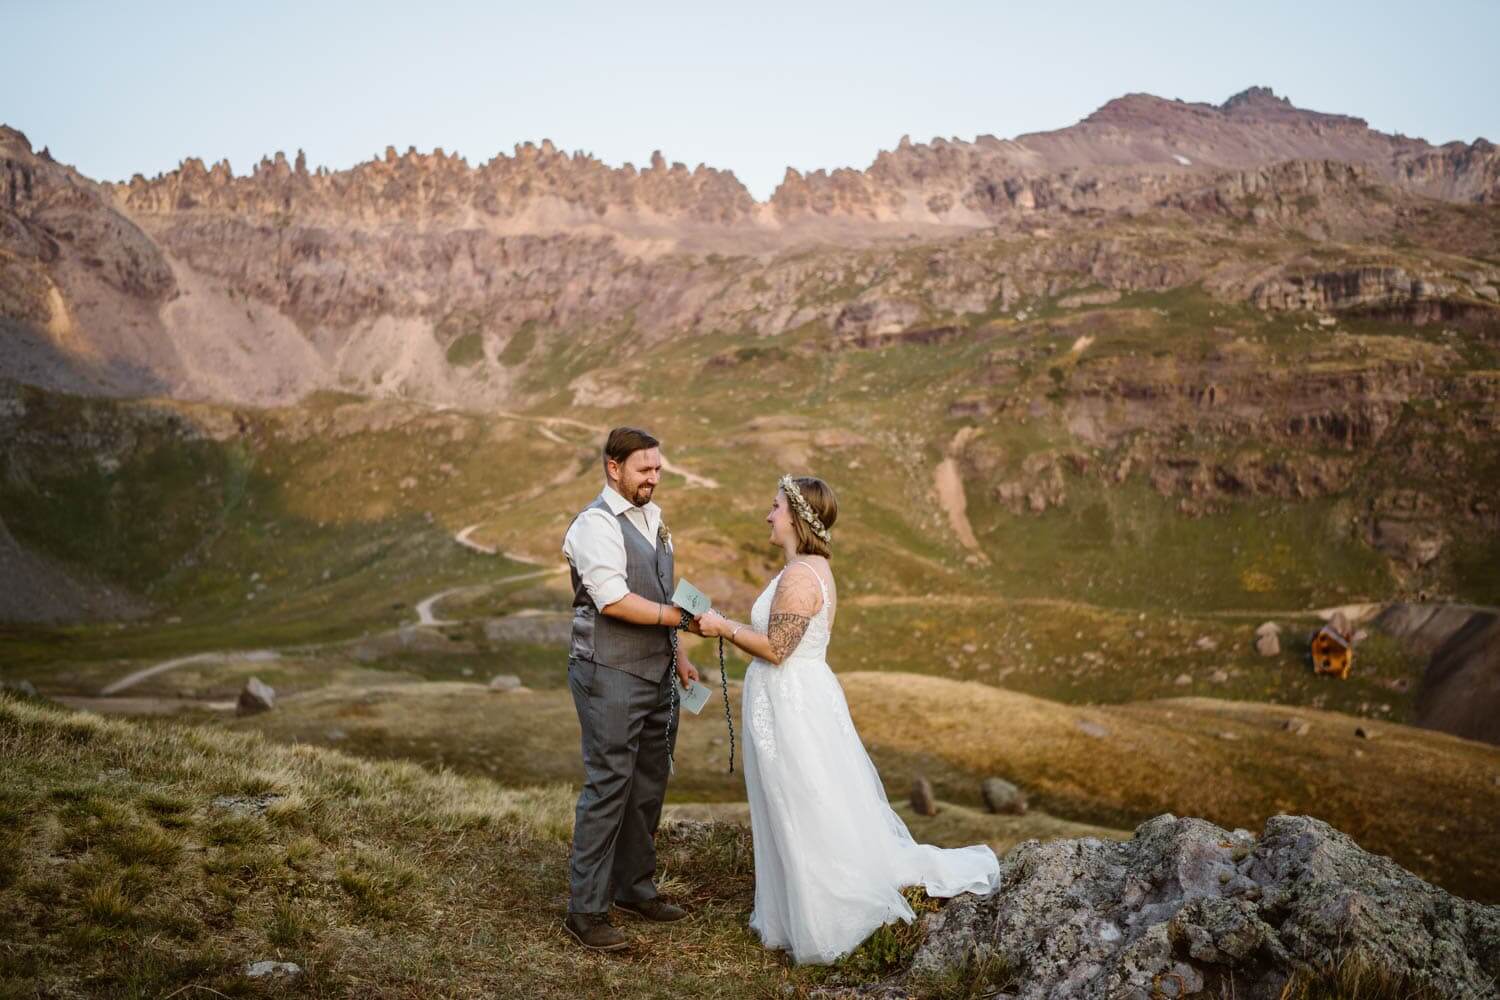 Couple sharing vows in the mountains at their off roading elopement.